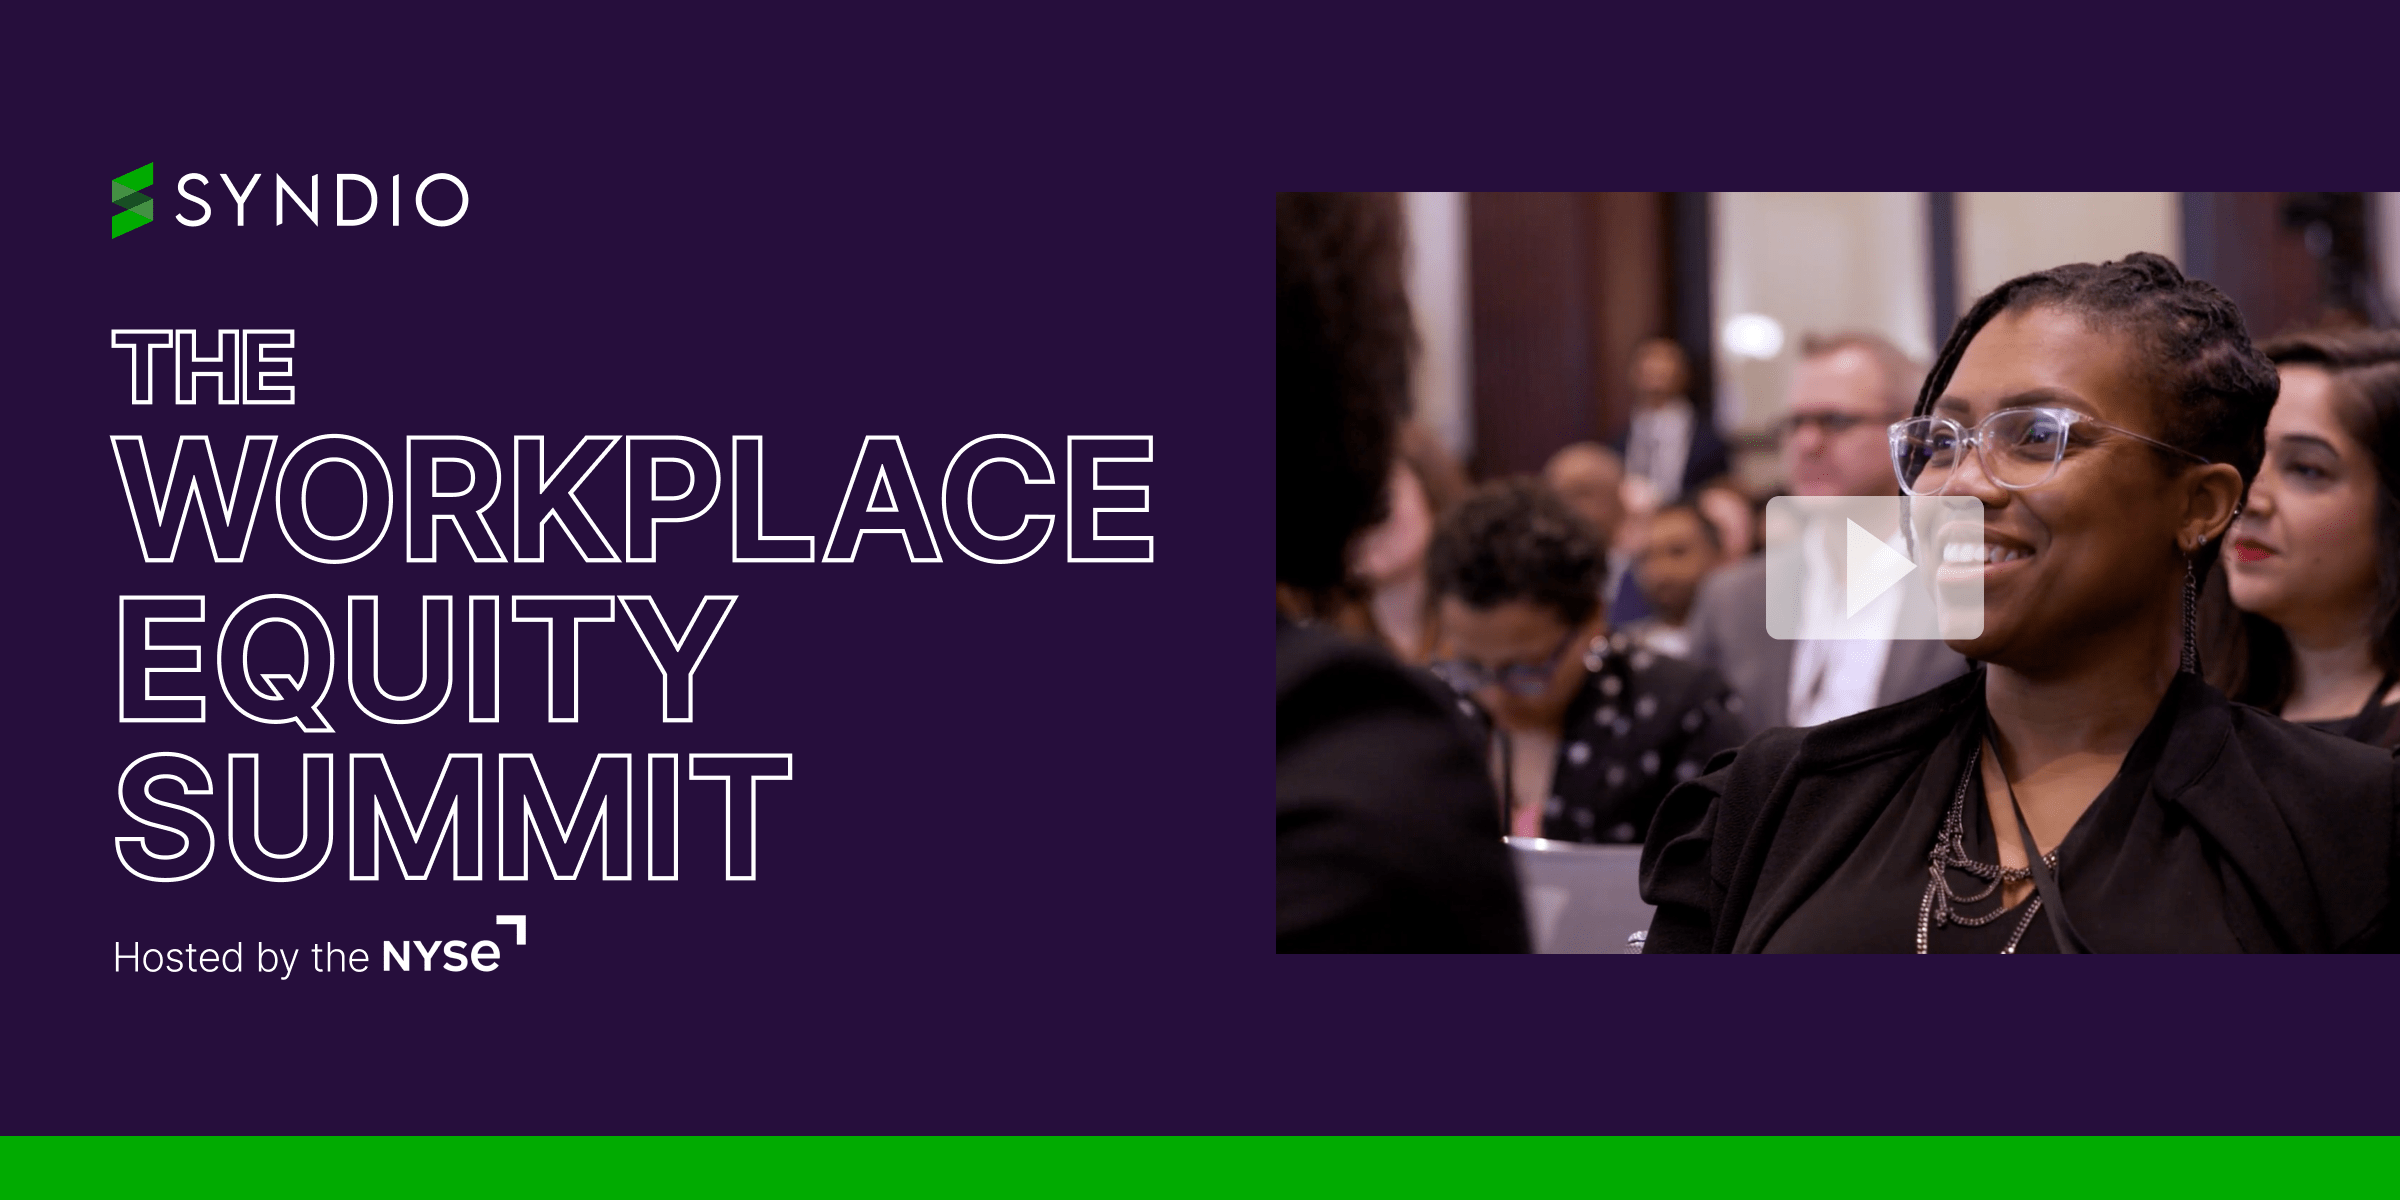 Watch the highlight reel video from the 2023 Workplace Equity Summit, hosted by NYSE